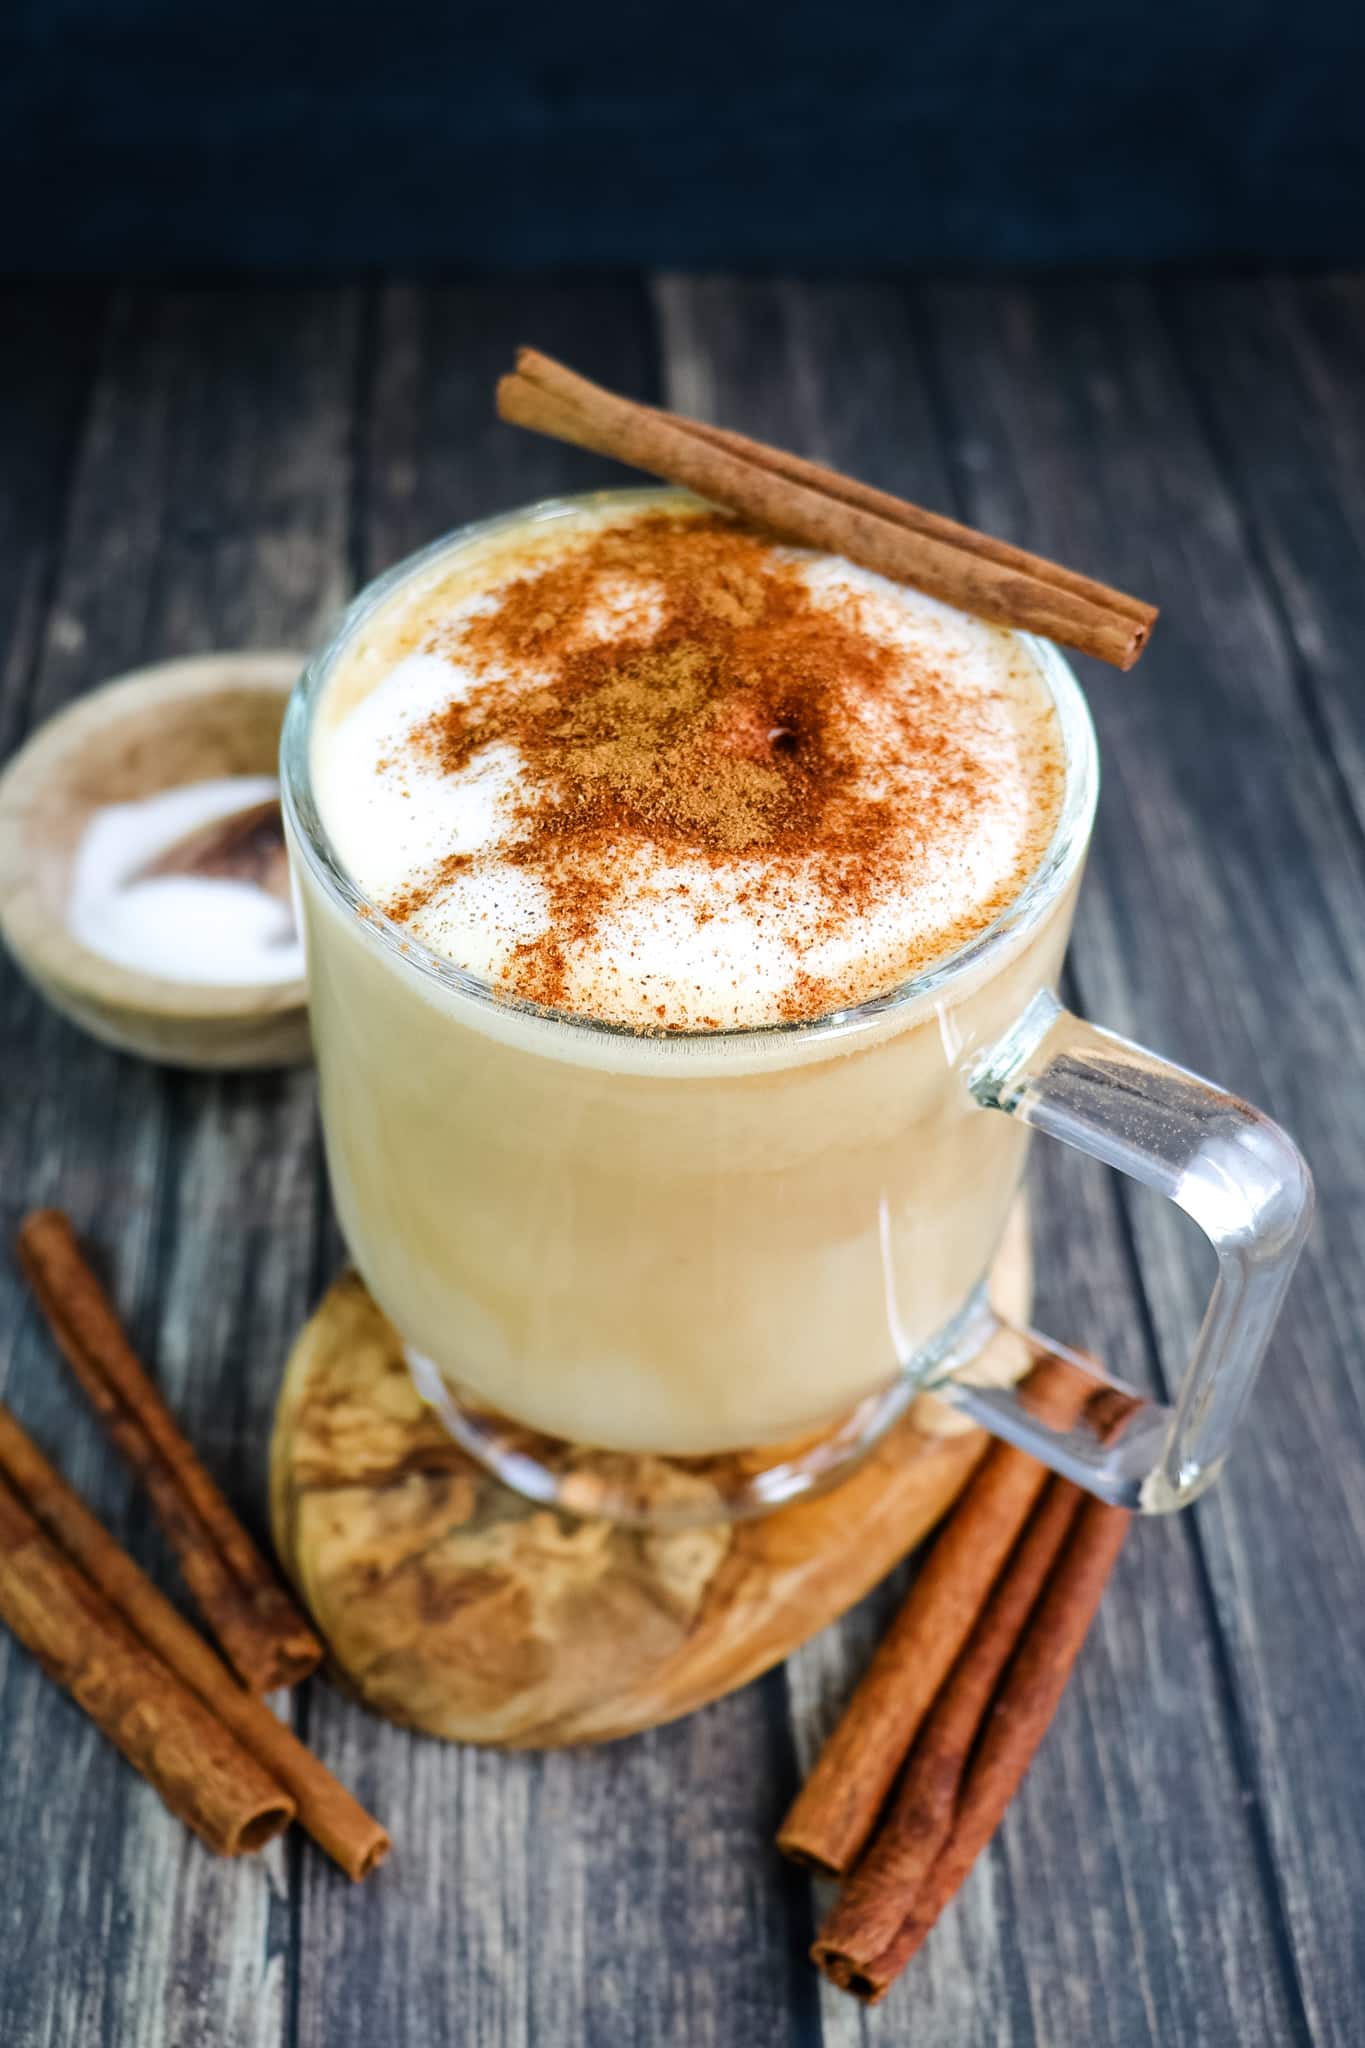 A cinnamon dolce latte topped with ground cinnamon and a cinnamon stick.